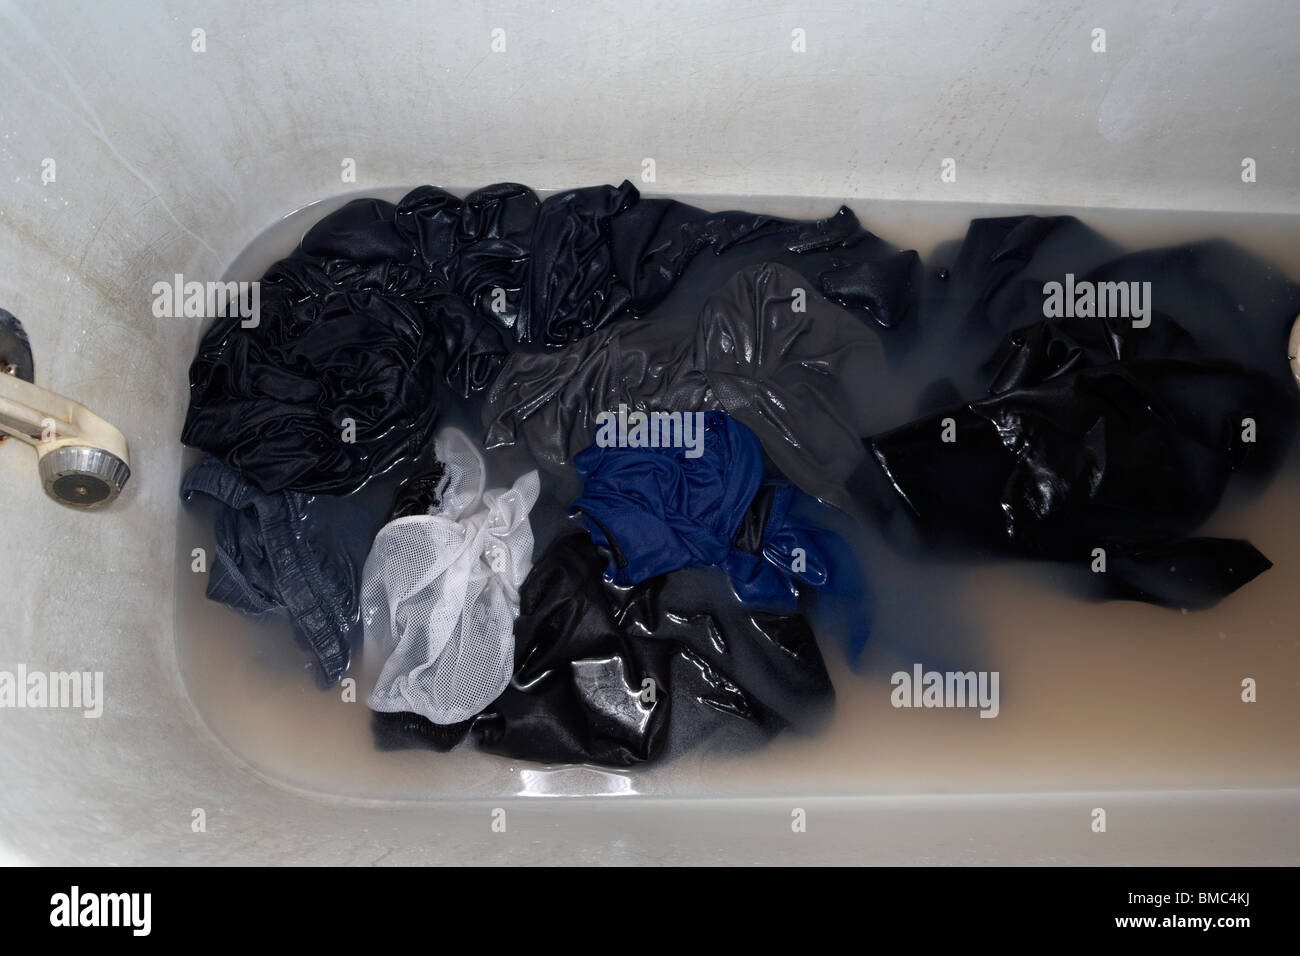 washing dirty clothes in dirty water in a dirty bath property released image Stock Photo